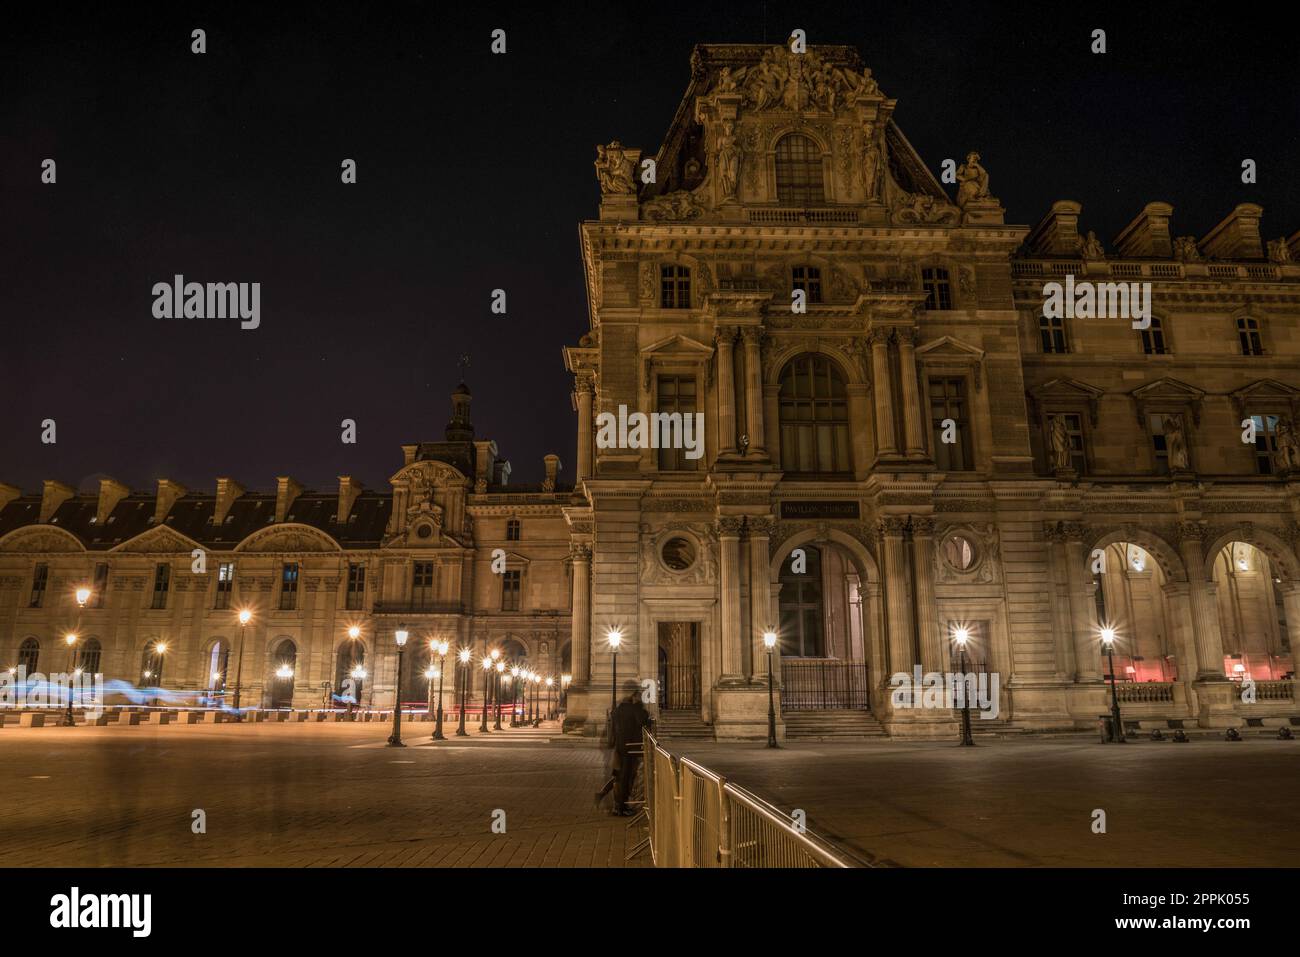 The famous Louvre Palace of Paris at night Stock Photo